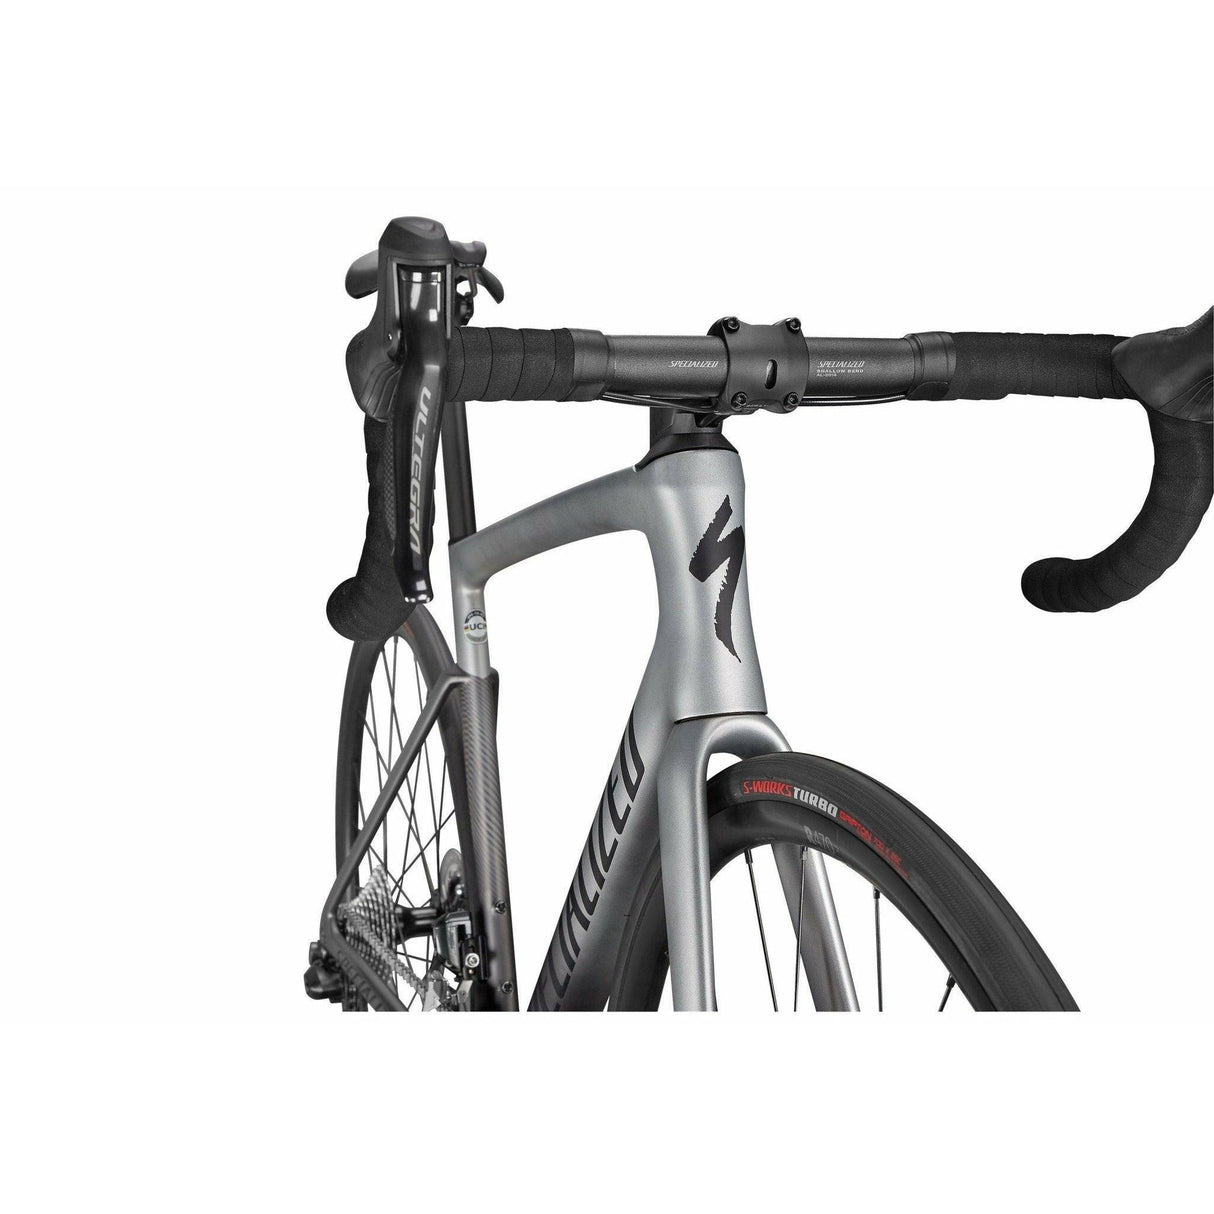 Specialized Tarmac SL7 Expert Ultegra Di2 | Strictly Bicycles 